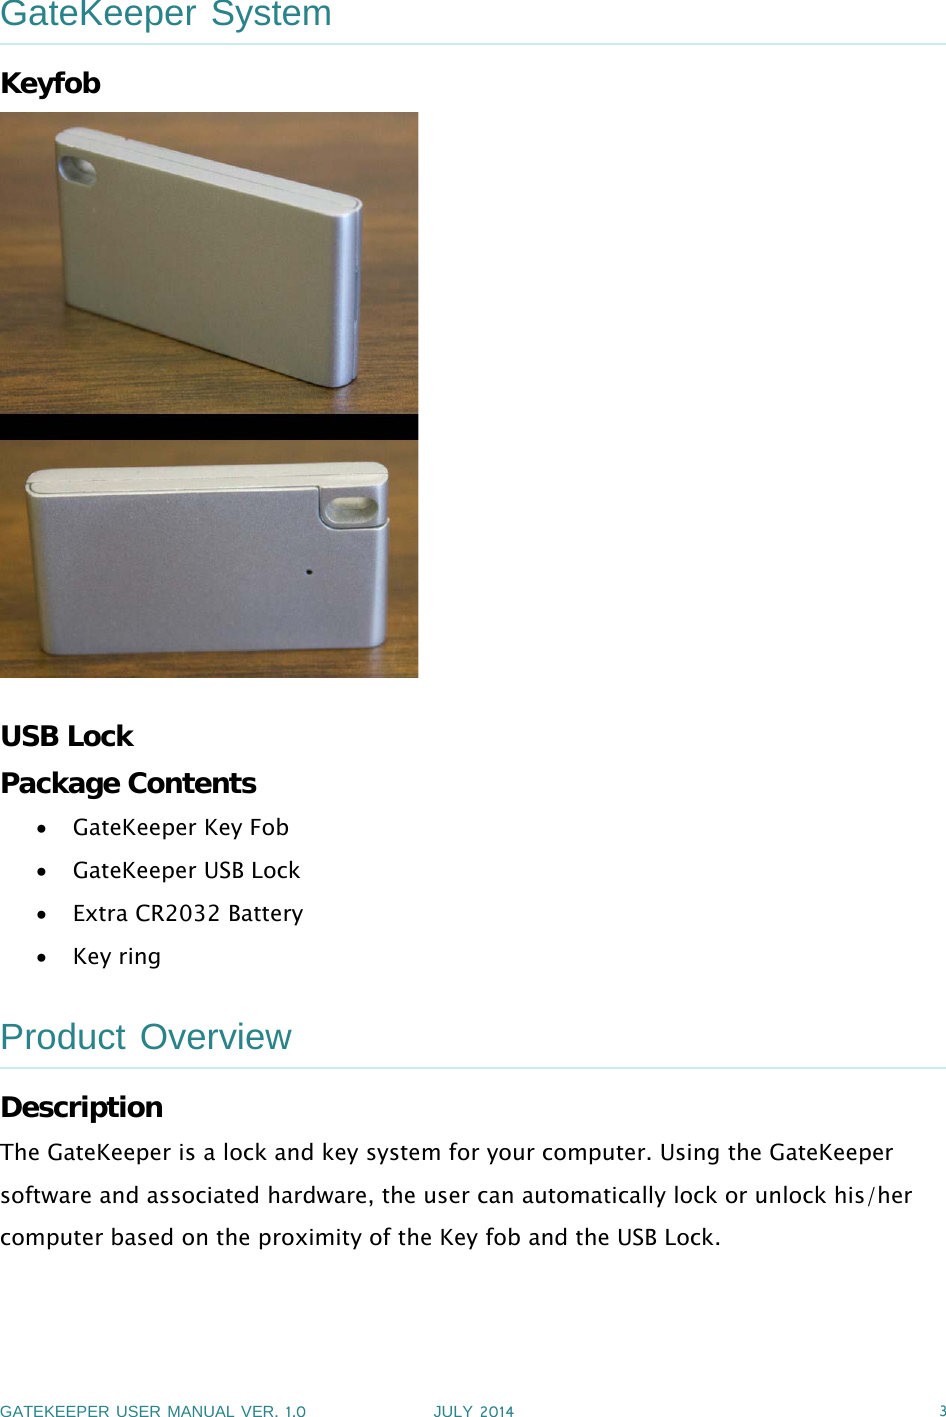 GATEKEEPER USER MANUAL VER.1.0 JULY 2014 3GateKeeper SystemKeyfobUSB LockPackage ContentsGateKeeper Key FobGateKeeper USB LockExtra CR2032 BatteryKey ringProduct OverviewDescriptionThe GateKeeper is a lock and key system for your computer. Using the GateKeepersoftware and associated hardware, the user can automatically lock or unlock his/hercomputer based on the proximity of the Key fob and the USB Lock.